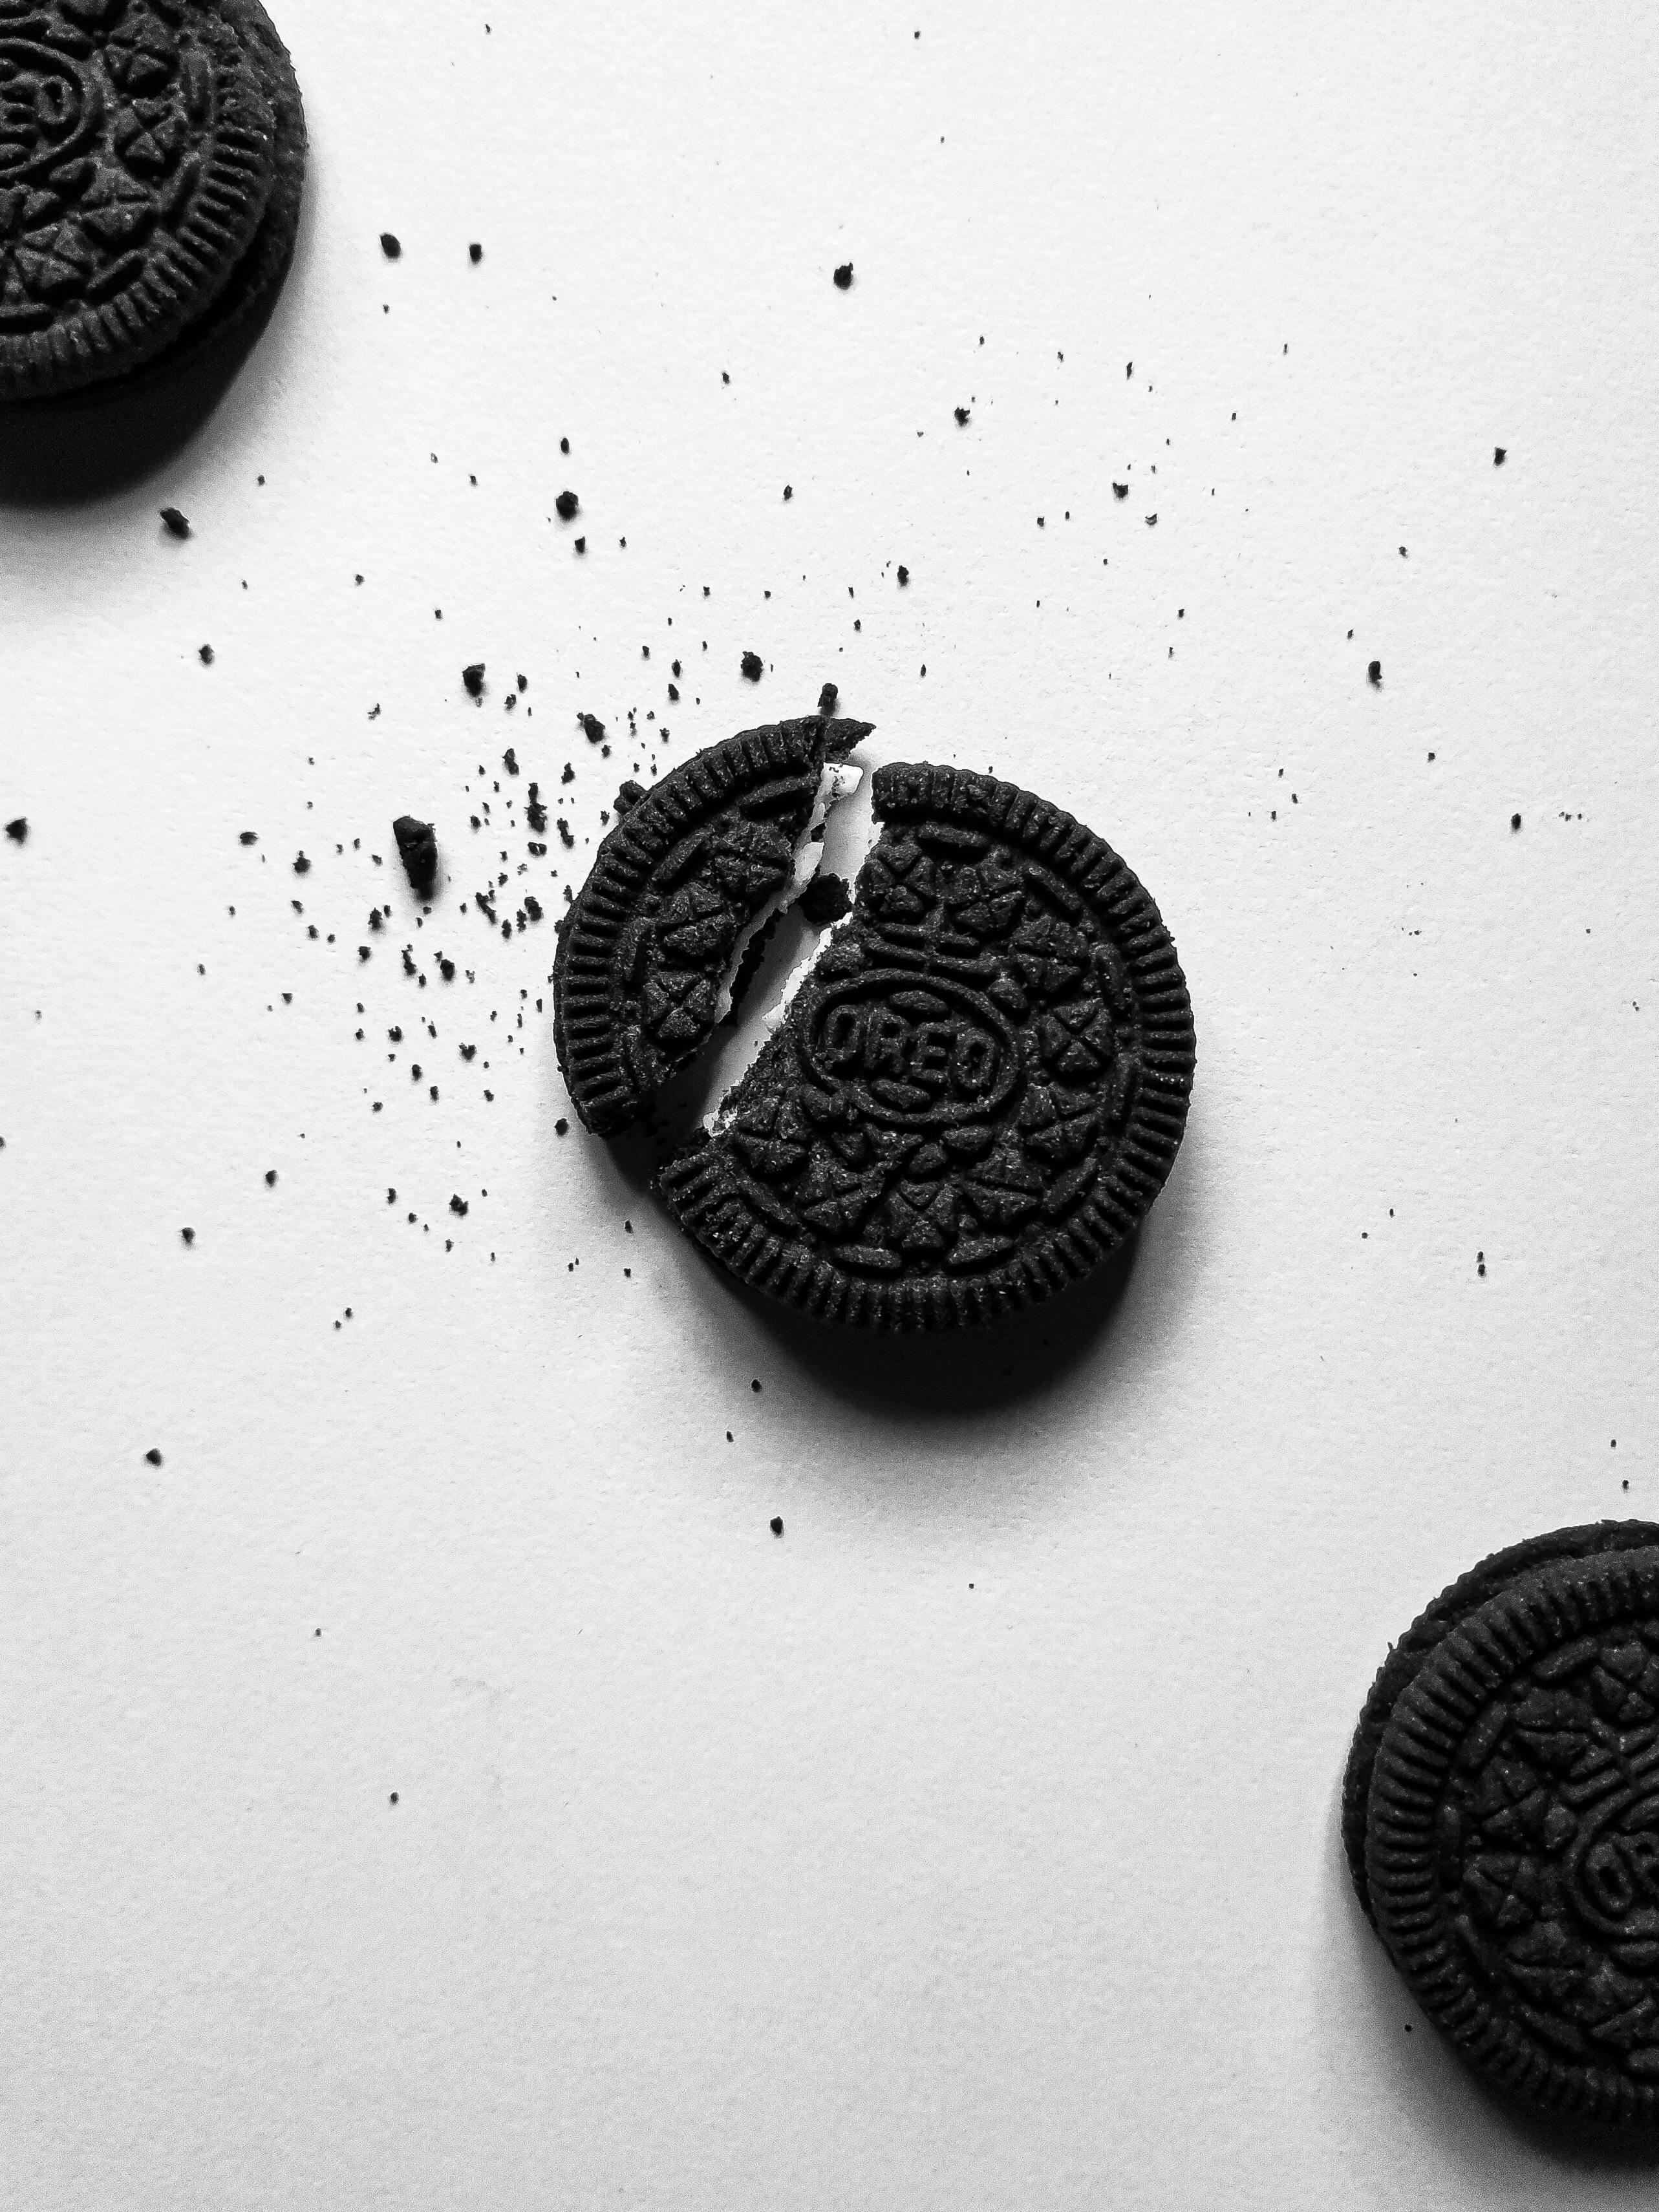 Some Oreo biscuits on a table | Source: Pexels